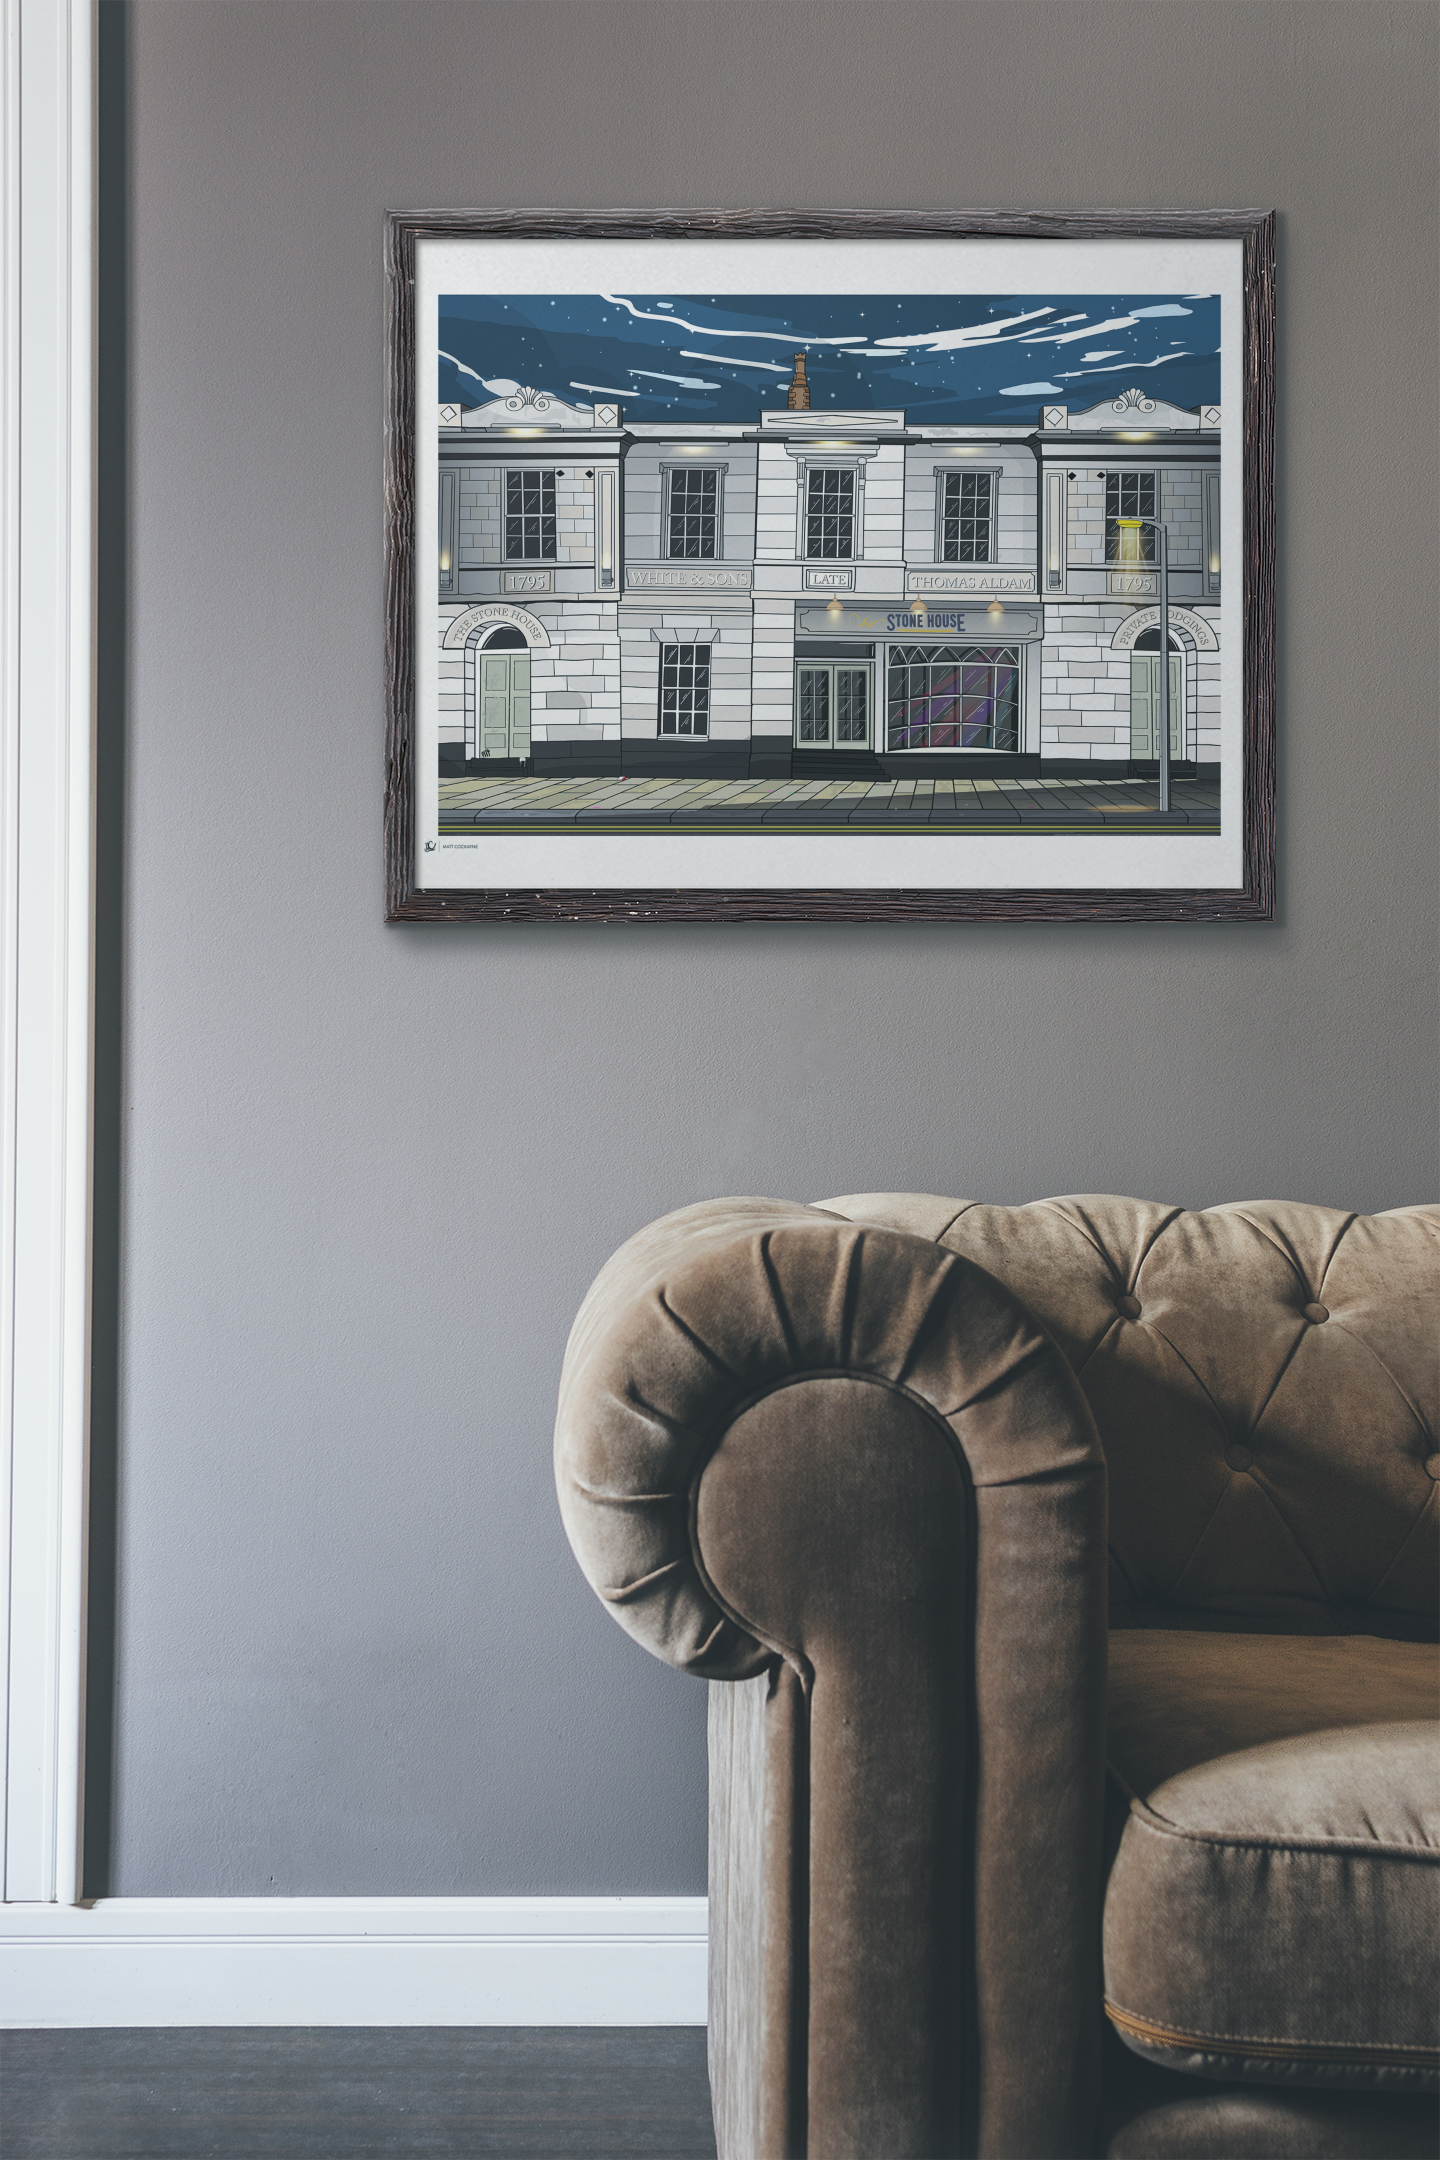 THE STONE HOUSE - Sheffield Prints - Wall Art - Poster - Print - Canvas - Illustration